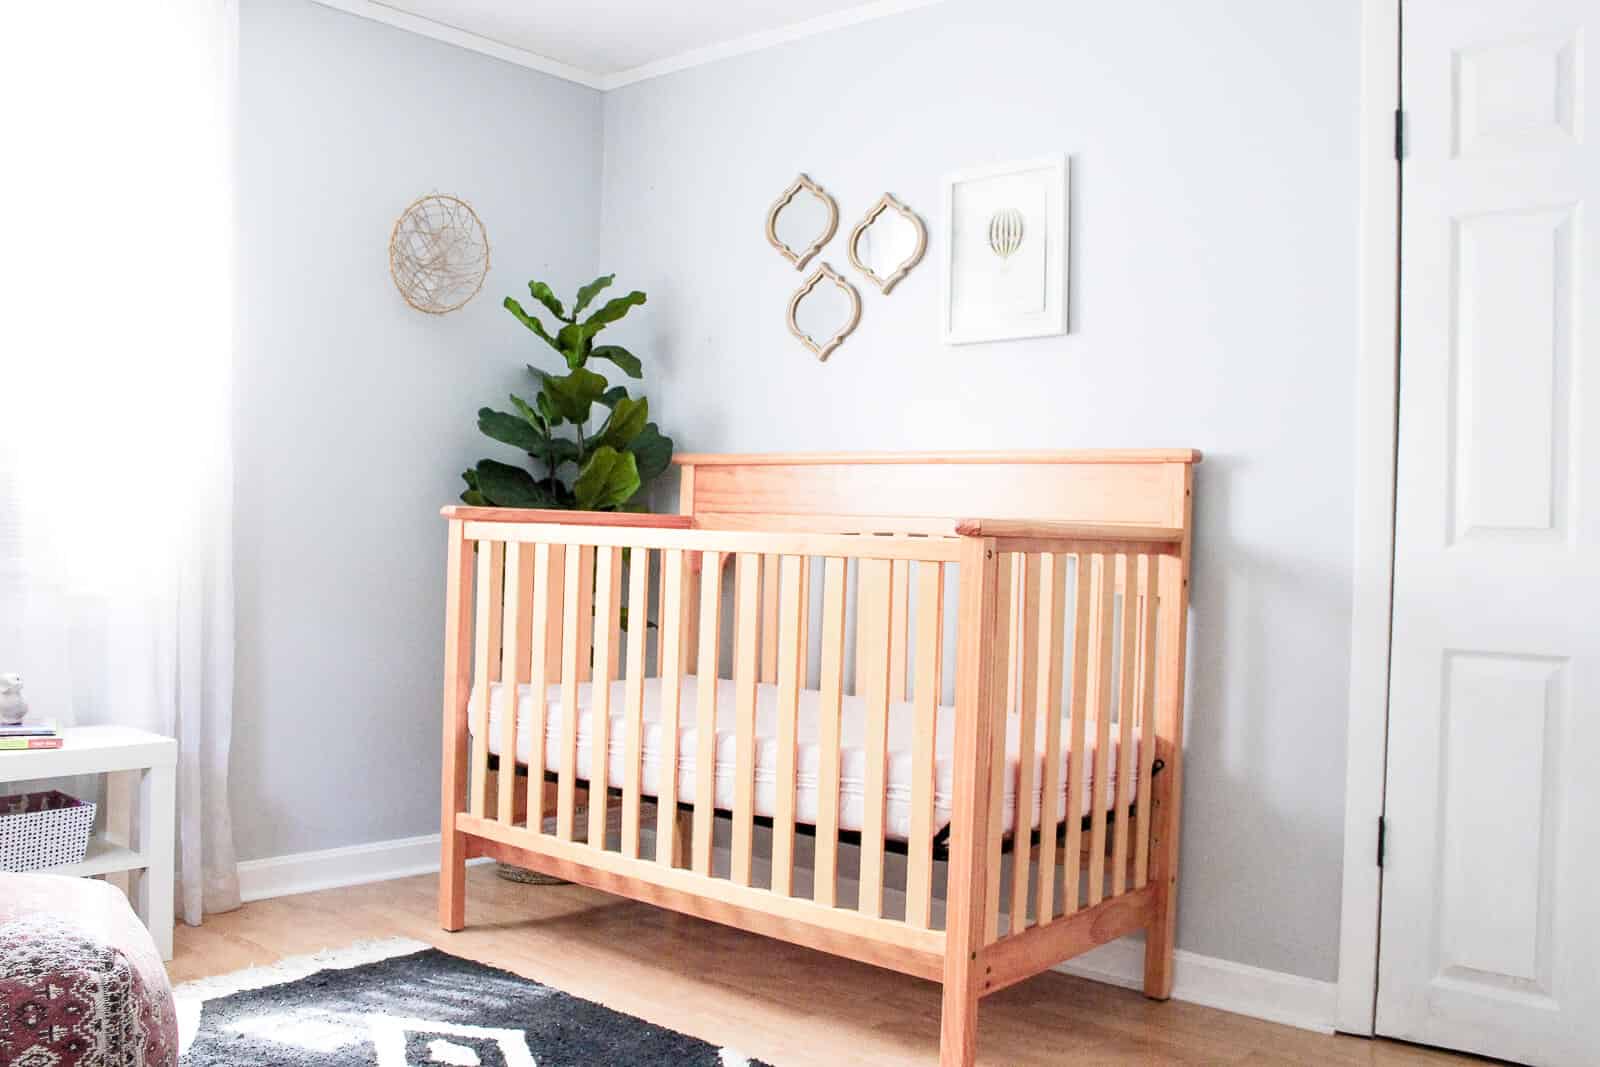 View of crib and wall decor in modern girl nursery.